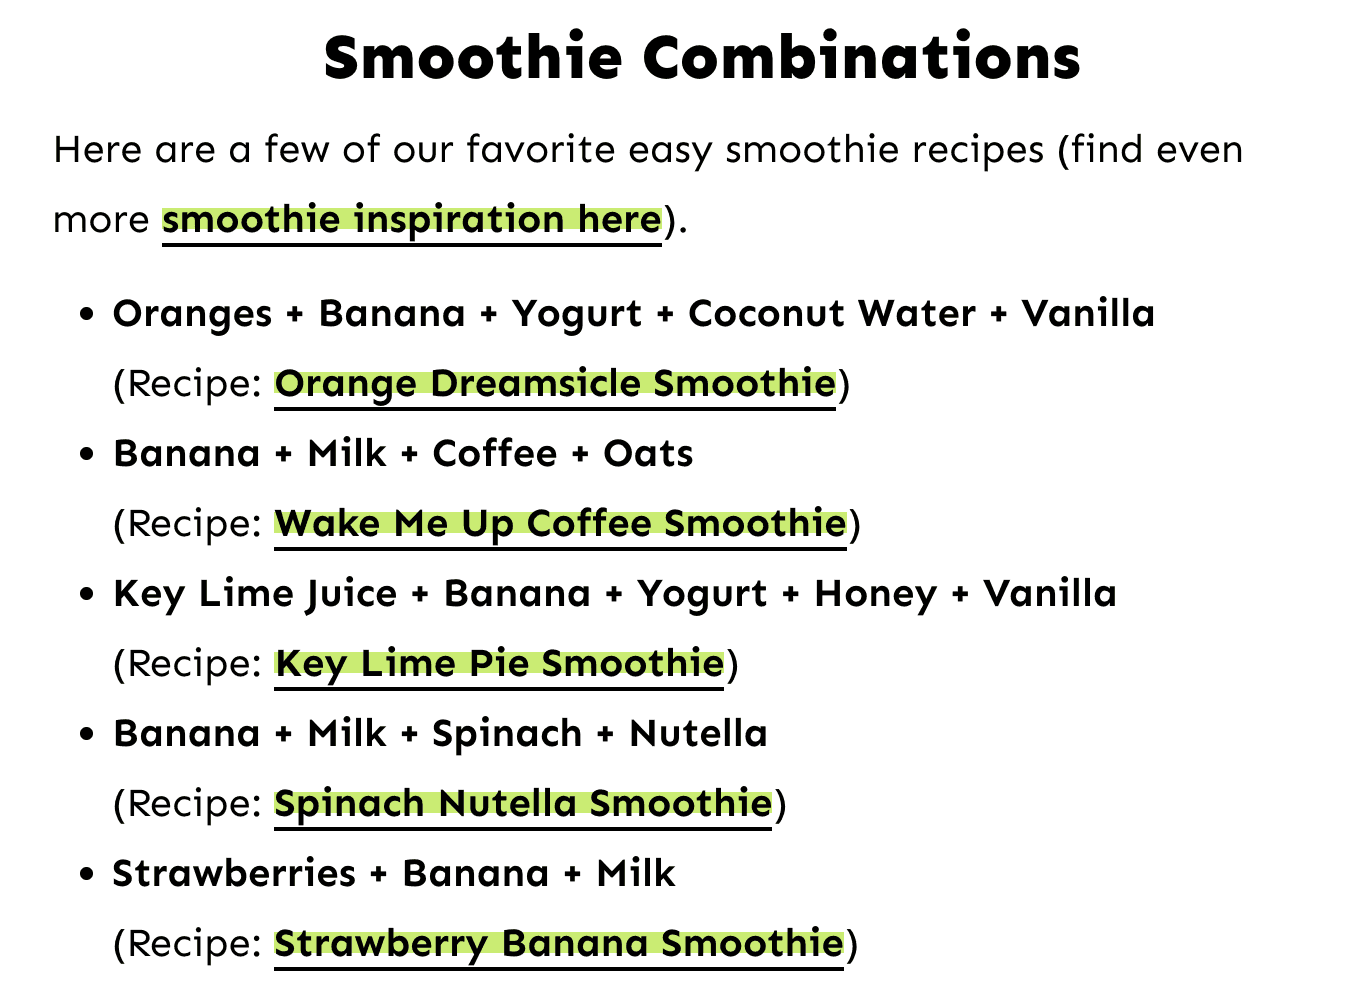 Smoothie combinations and listed different ingredients 